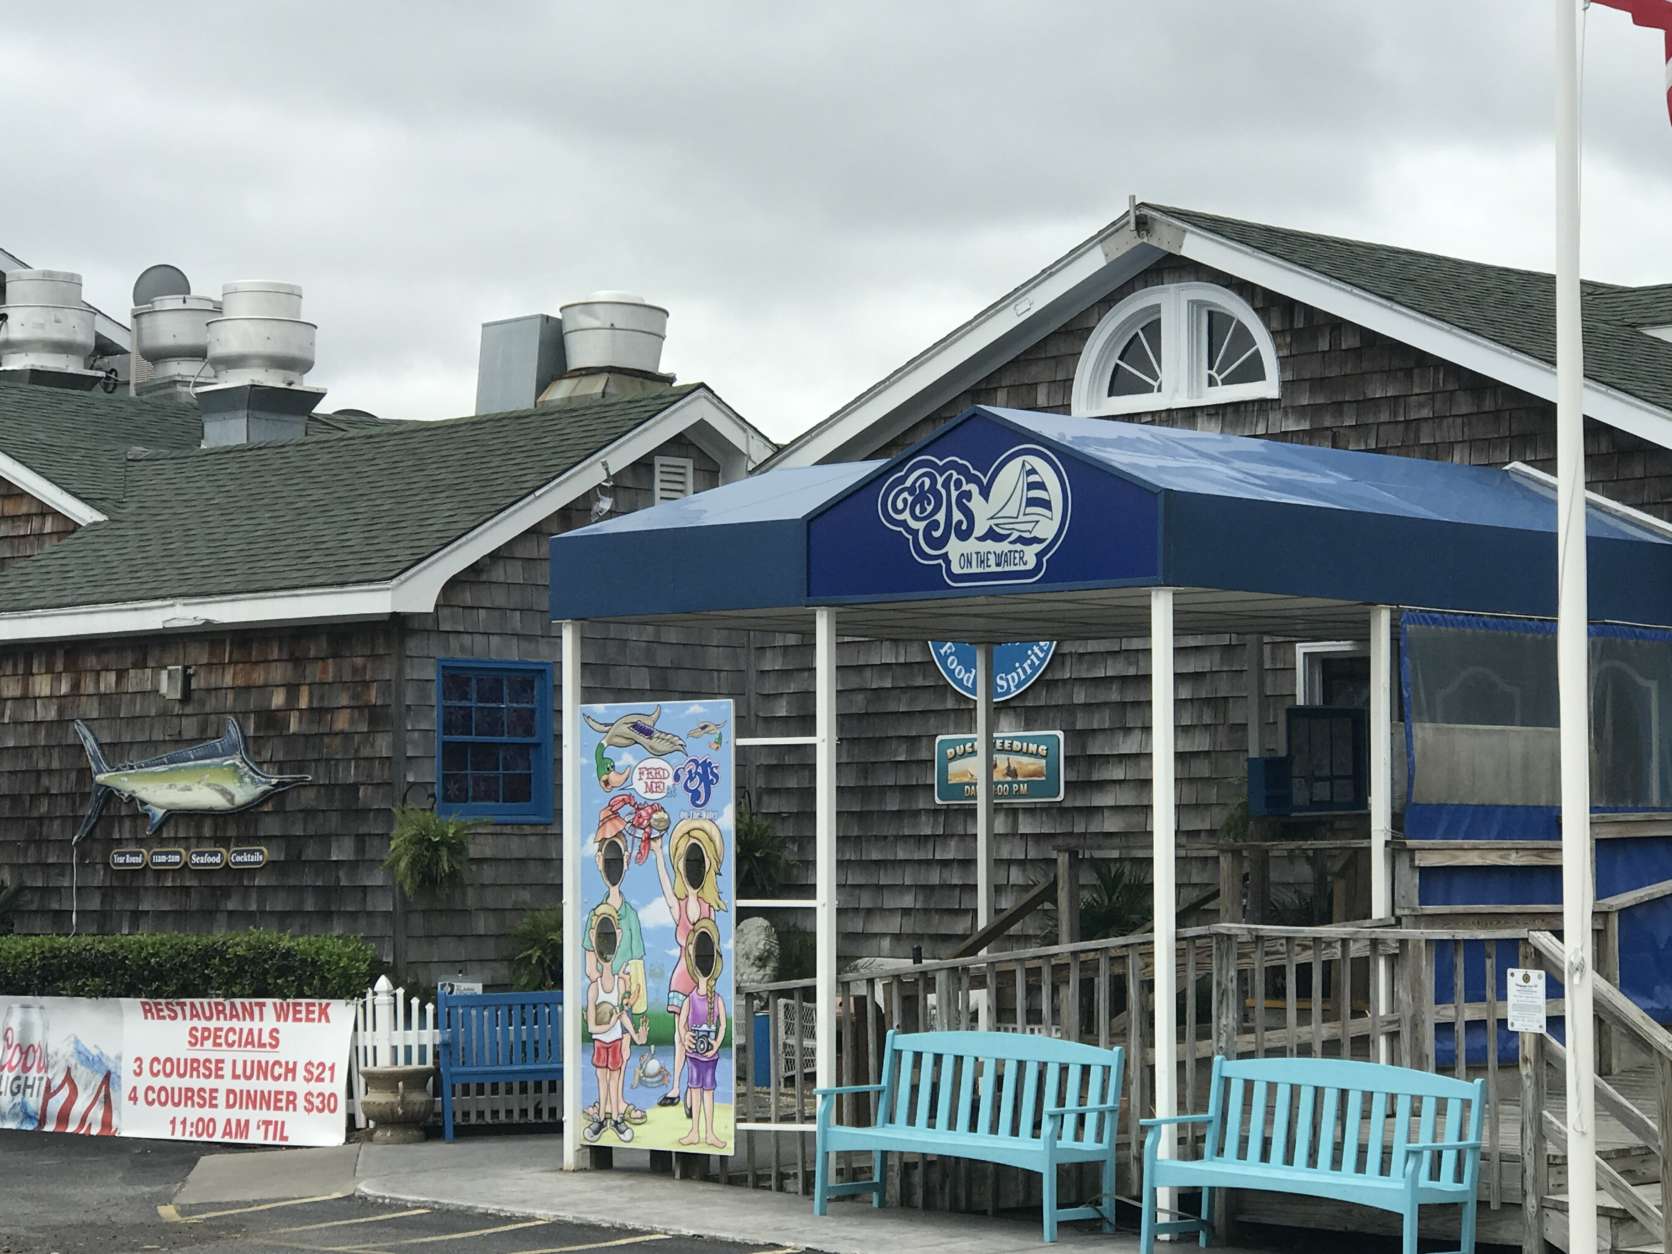 <a href="http://bjsonthewater.com/our-menu/"><strong>BJ's on the Water</strong></a>
<em>115 75th St, Ocean City, Maryland </em>

WTOP's Julia Ziegler says BJ's has great views of the bay, free popcorn at the bar and live music. Her go-to order is the seafood skins, which she describes as "a great mix of potato skins and seafood salad, topped with cheese. You won’t regret it!" (WTOP/Megan Cloherty)